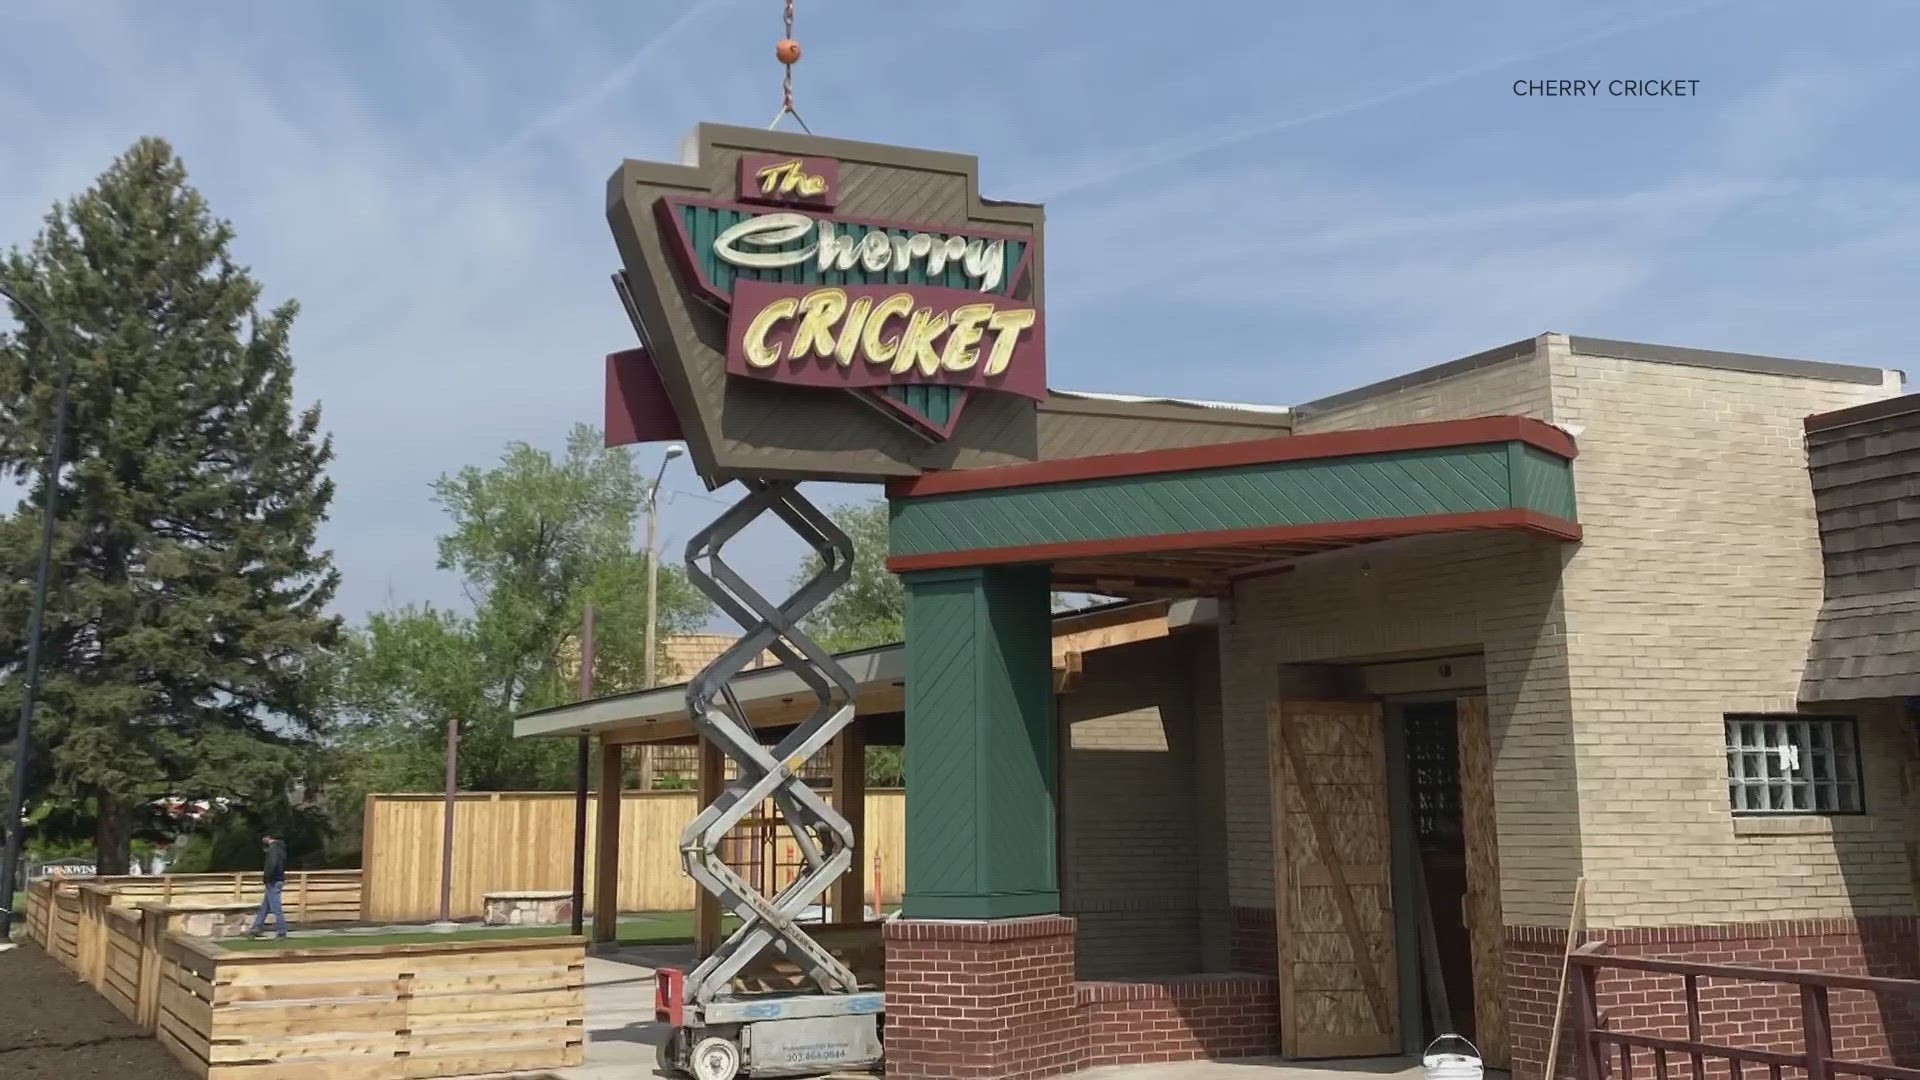 Over the weekend, Cherry Cricket installed their iconic sign outside of the restaurant's new Littleton location, which is set to open later this month.